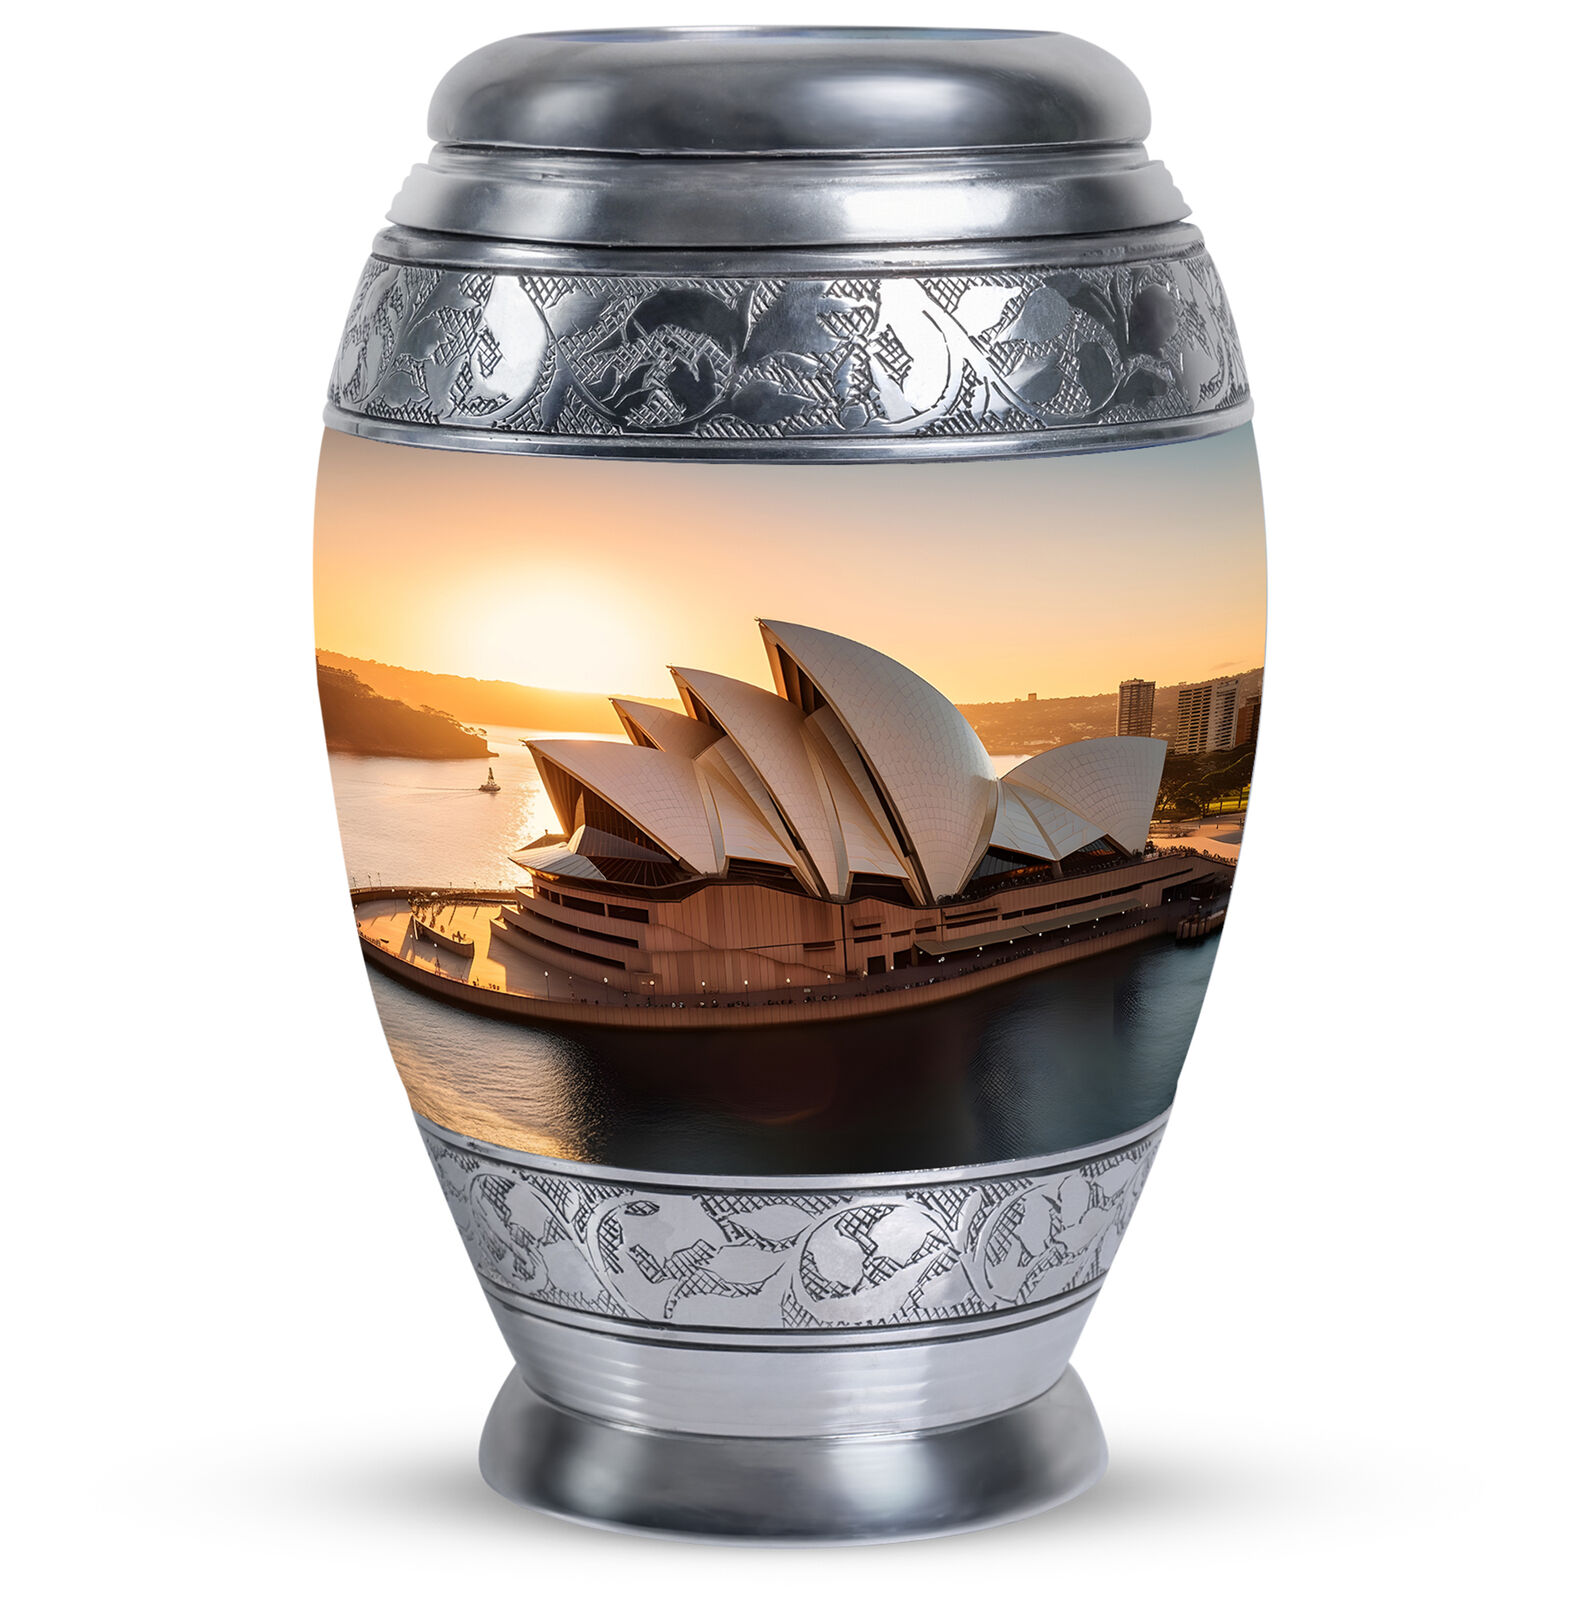 Urn For Human Ashes Sydney Opera House (10 Inch) Large Urn